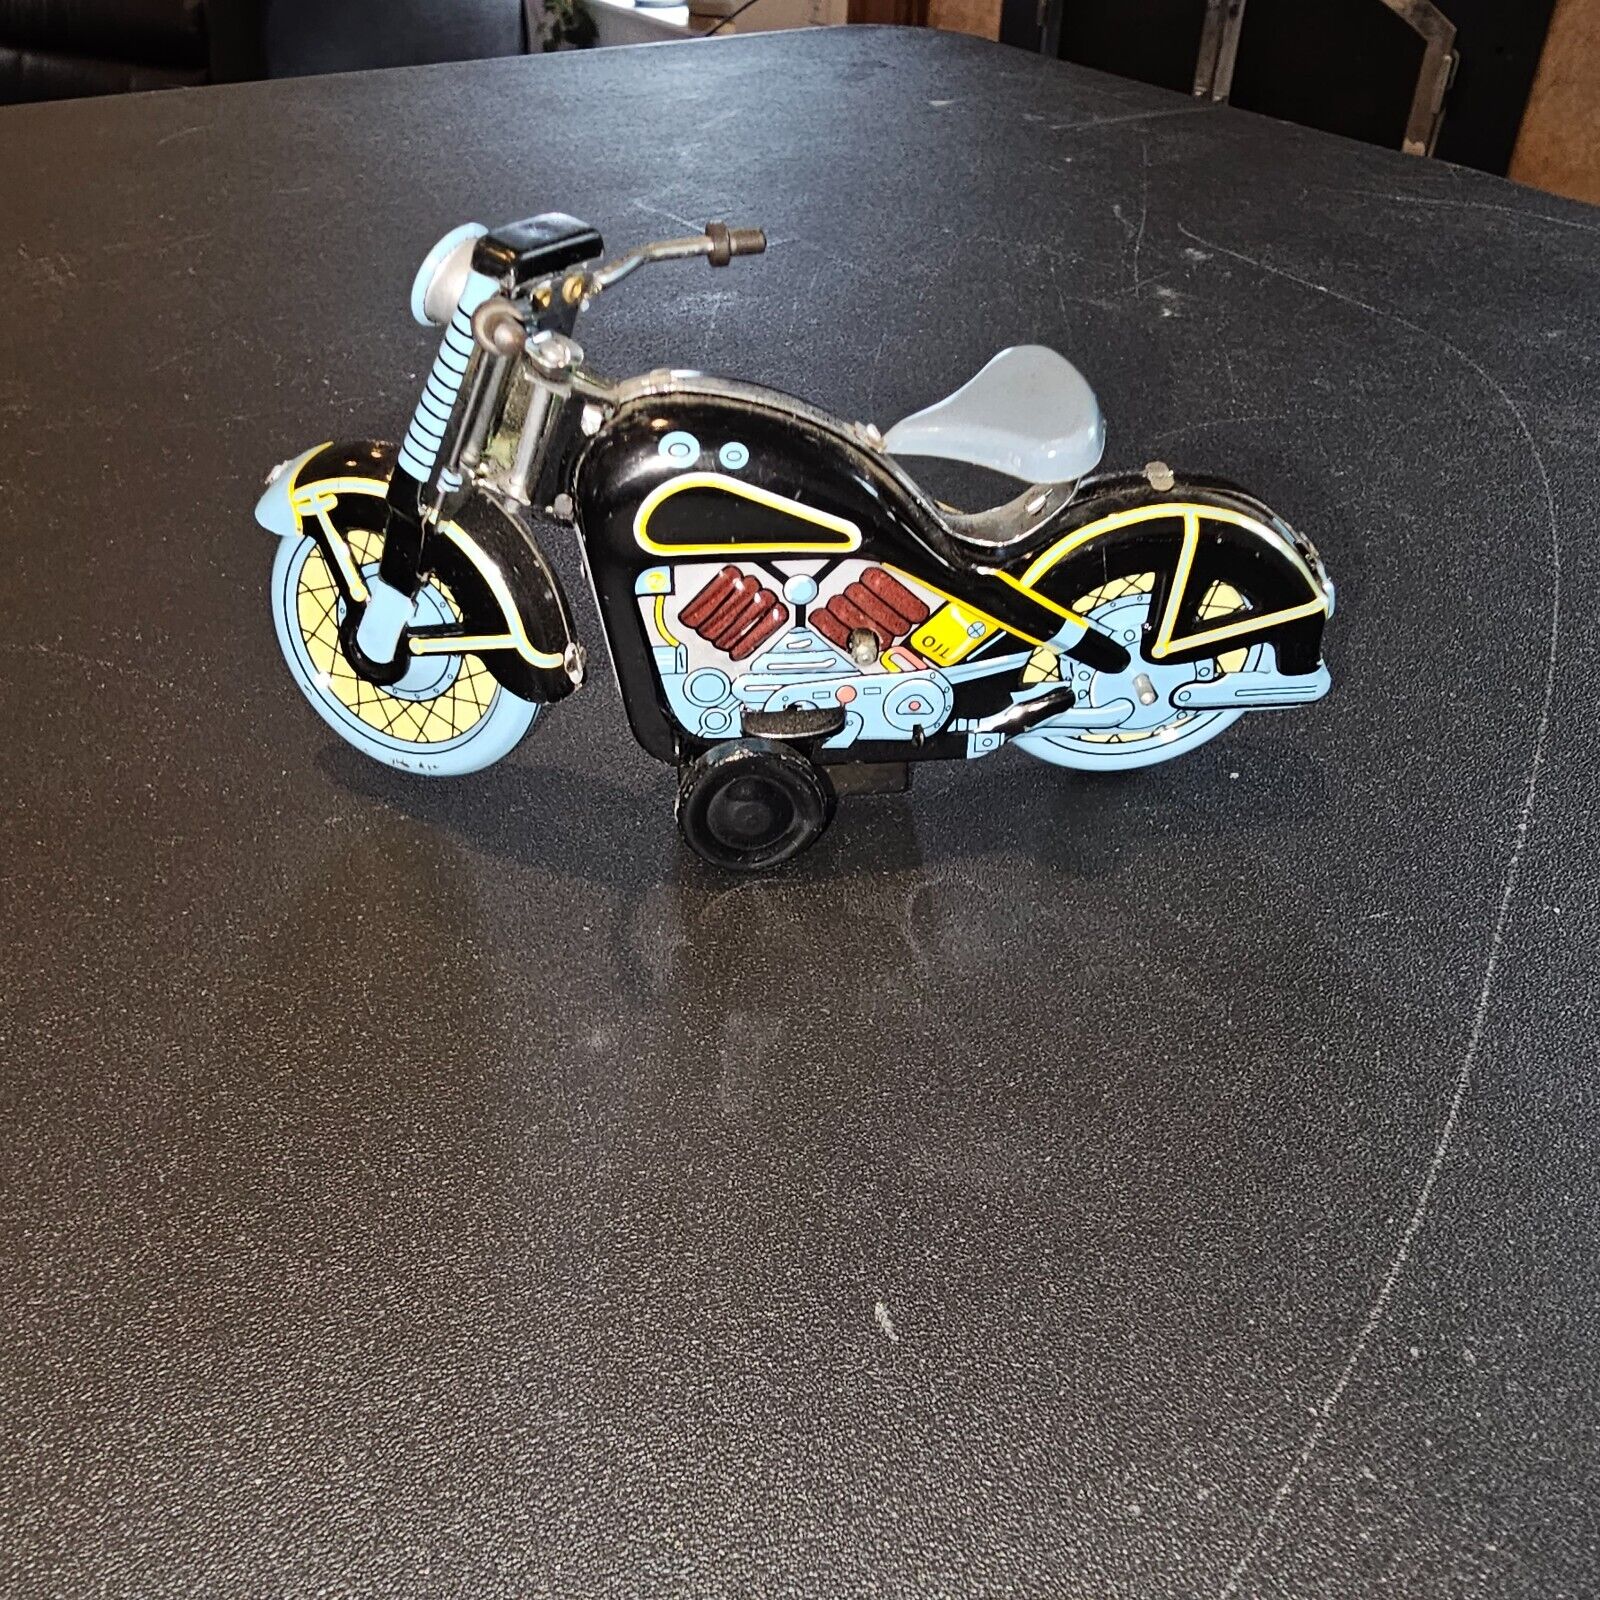 Xonex Harley Davidsontin toy replica. Black and blue. Used-in great condition.  